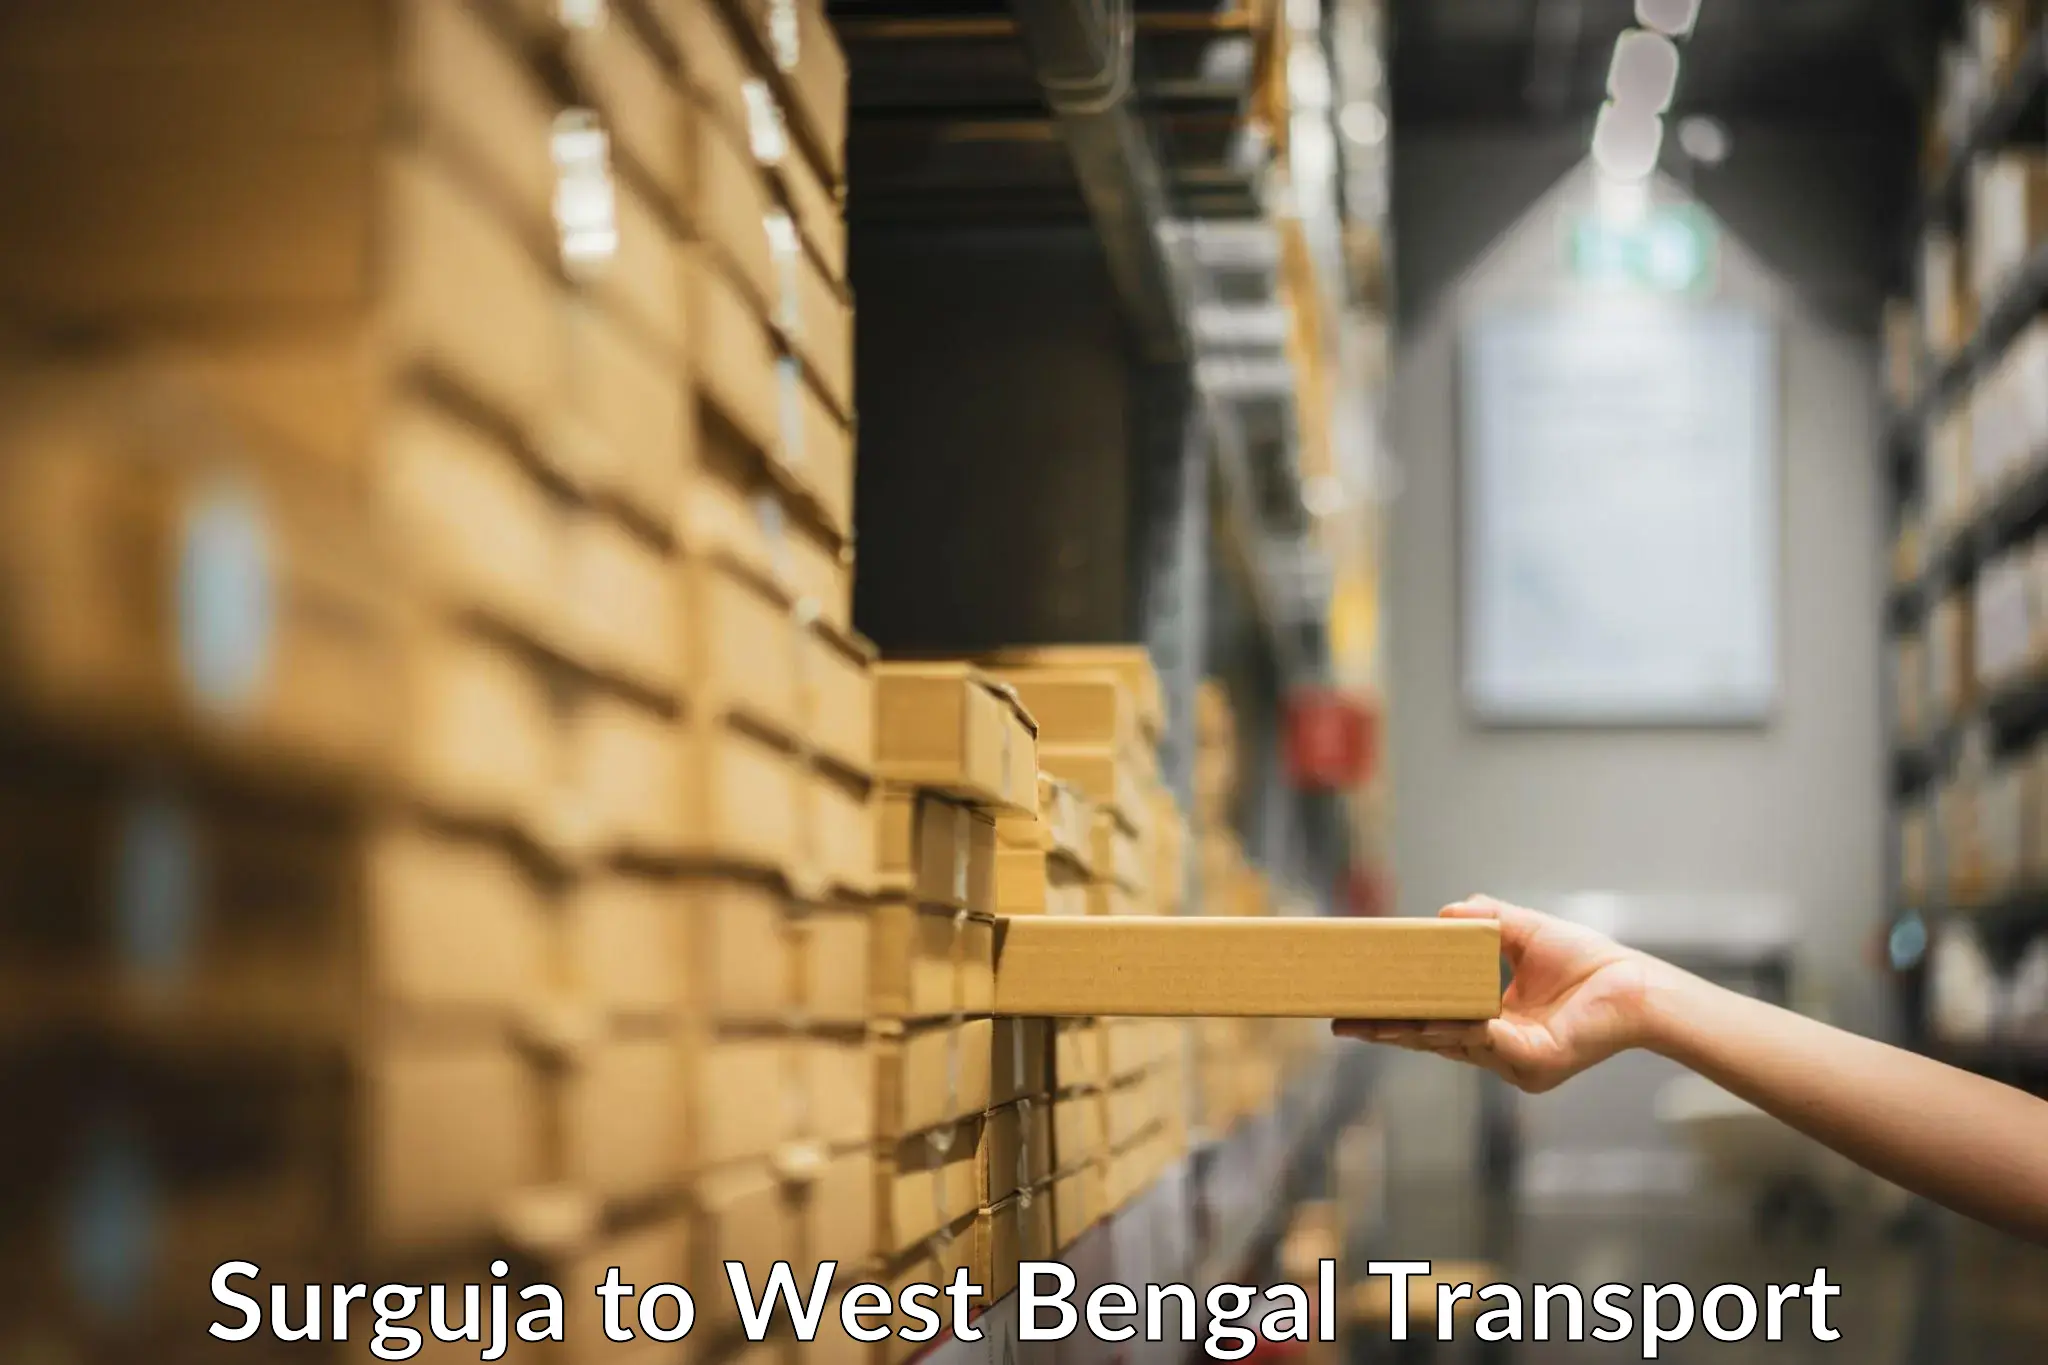 Commercial transport service Surguja to Paschim Medinipur